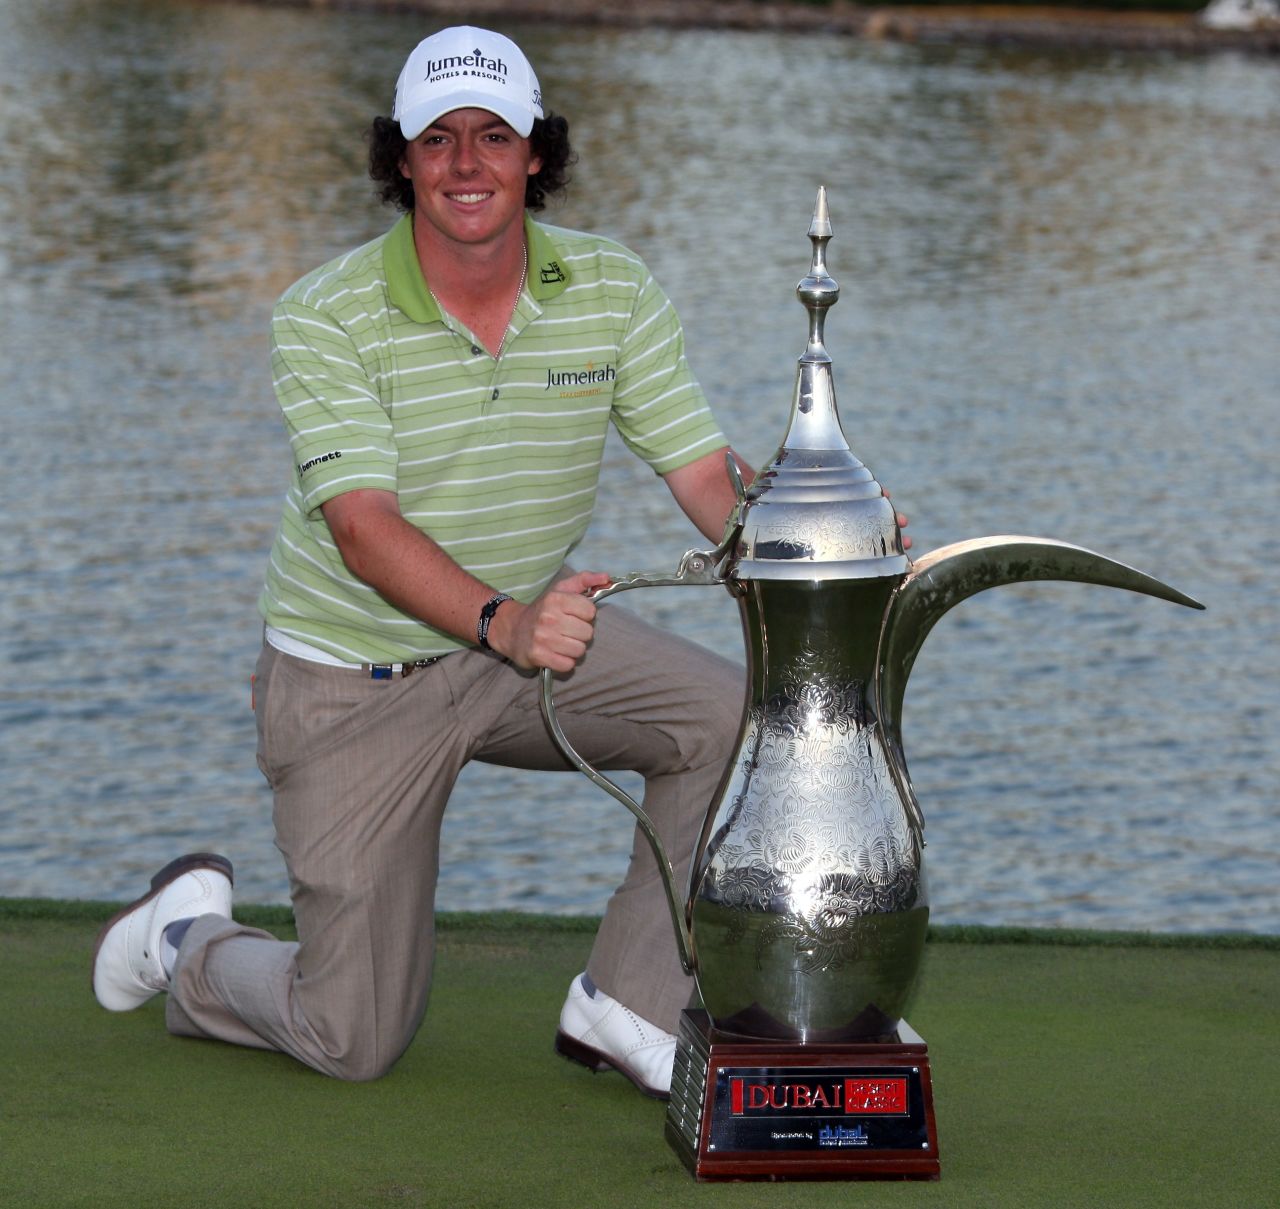 <strong>Professional breakthrough: </strong> He delayed turning pro until after the Walker Cup, the amateur version of the Ryder Cup, in September 2007. He won his first pro event at the 2009 Dubai Desert Classic.